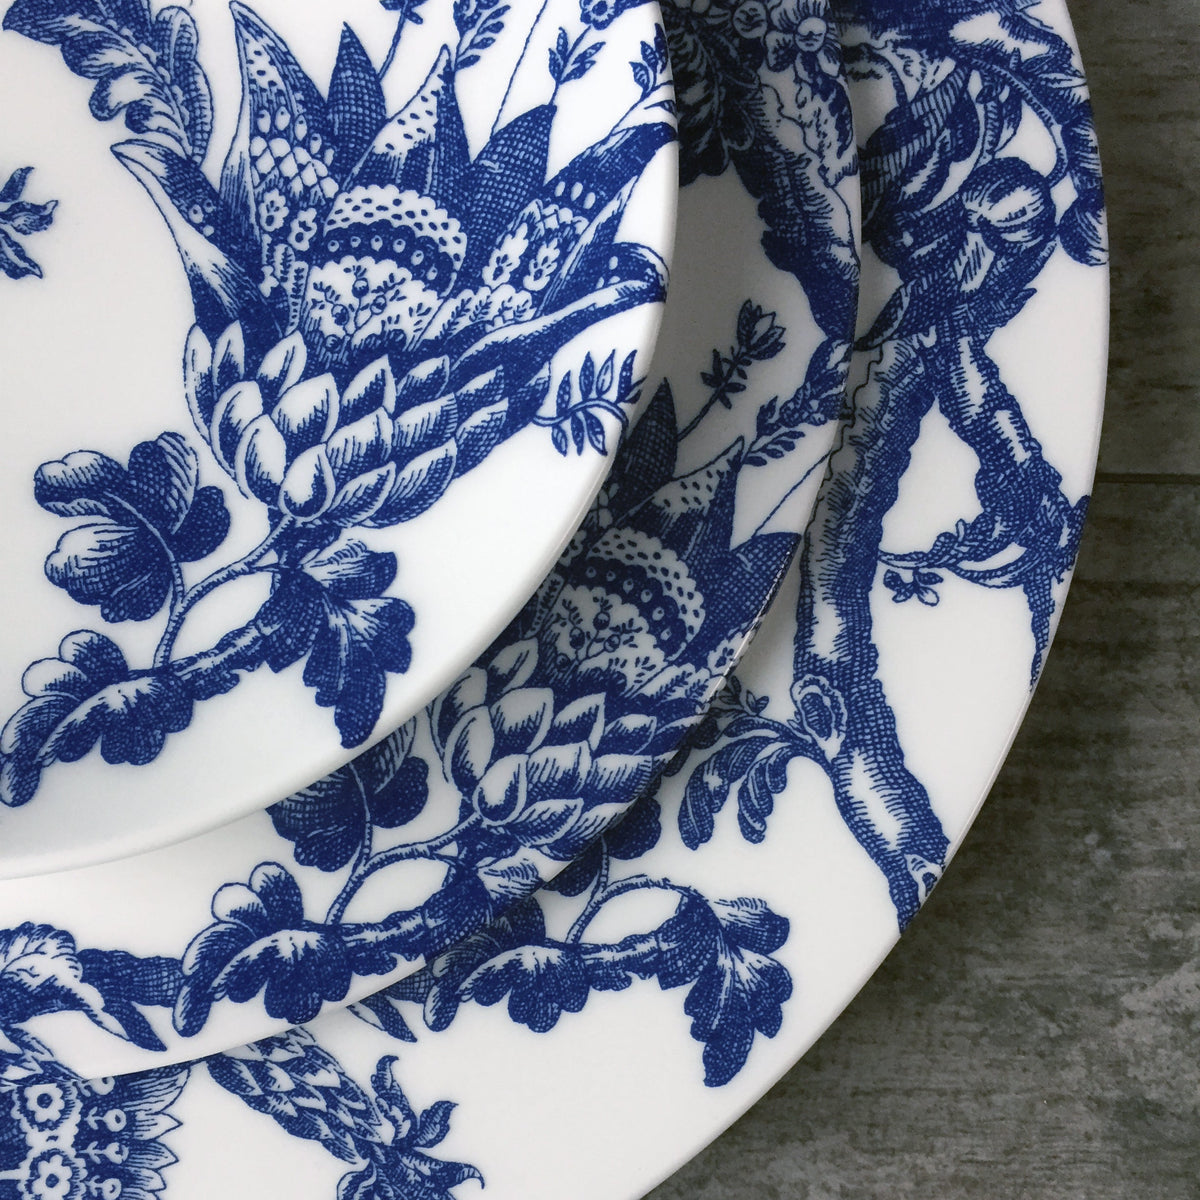 The blue and white porcelain Arcadia Canapé Plate by Caskata is shown on top of the coordinating salad and dinner plates in the collection.